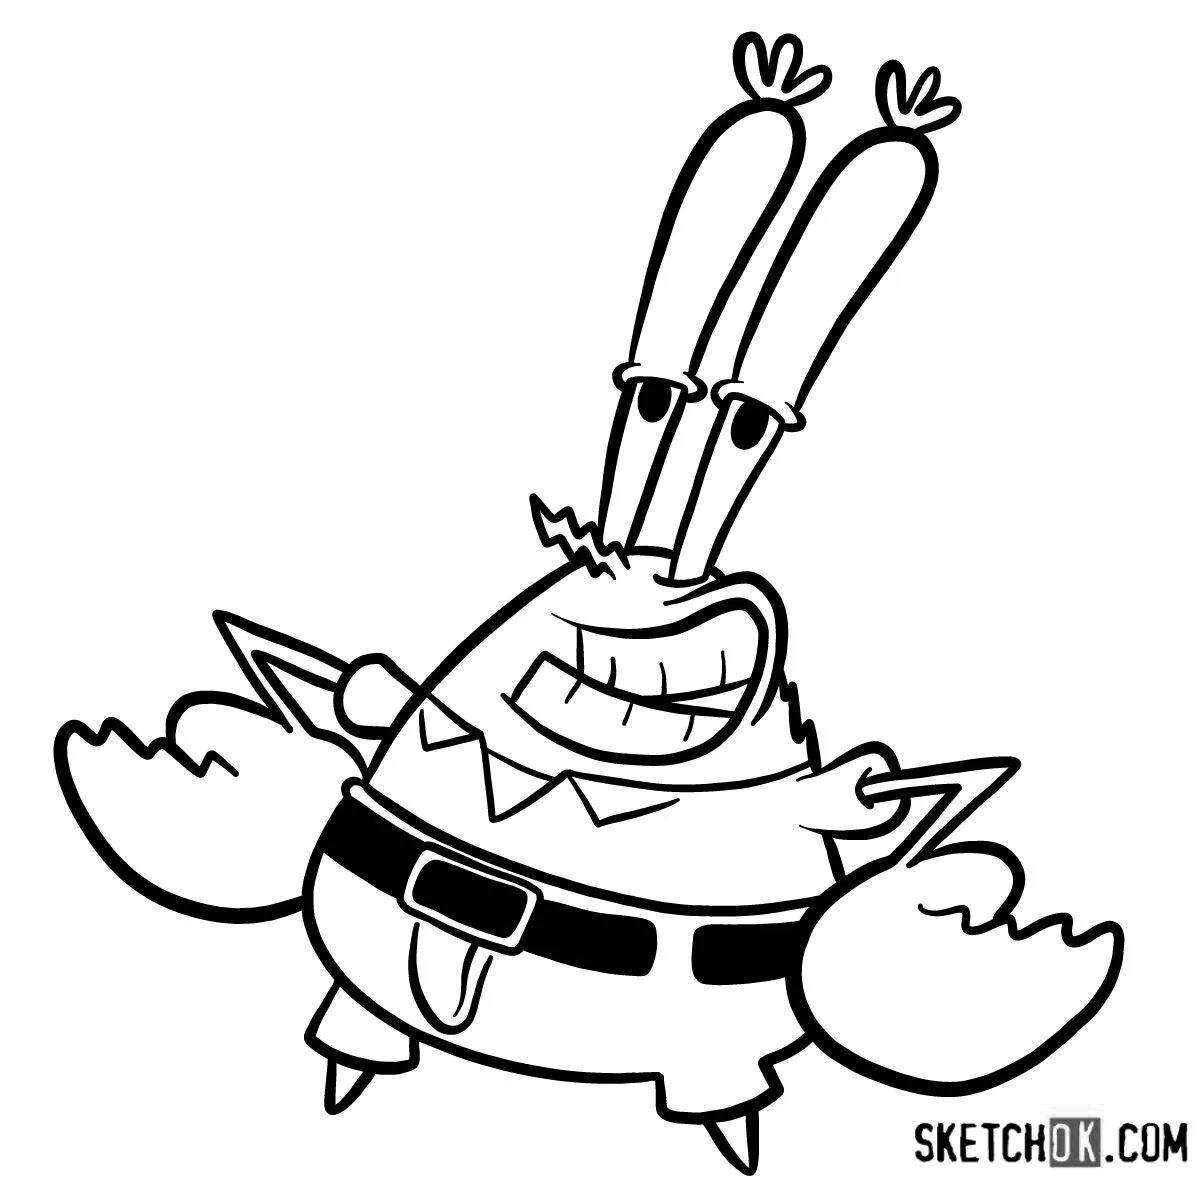 Intriguing Krusty Krab Coloring Page